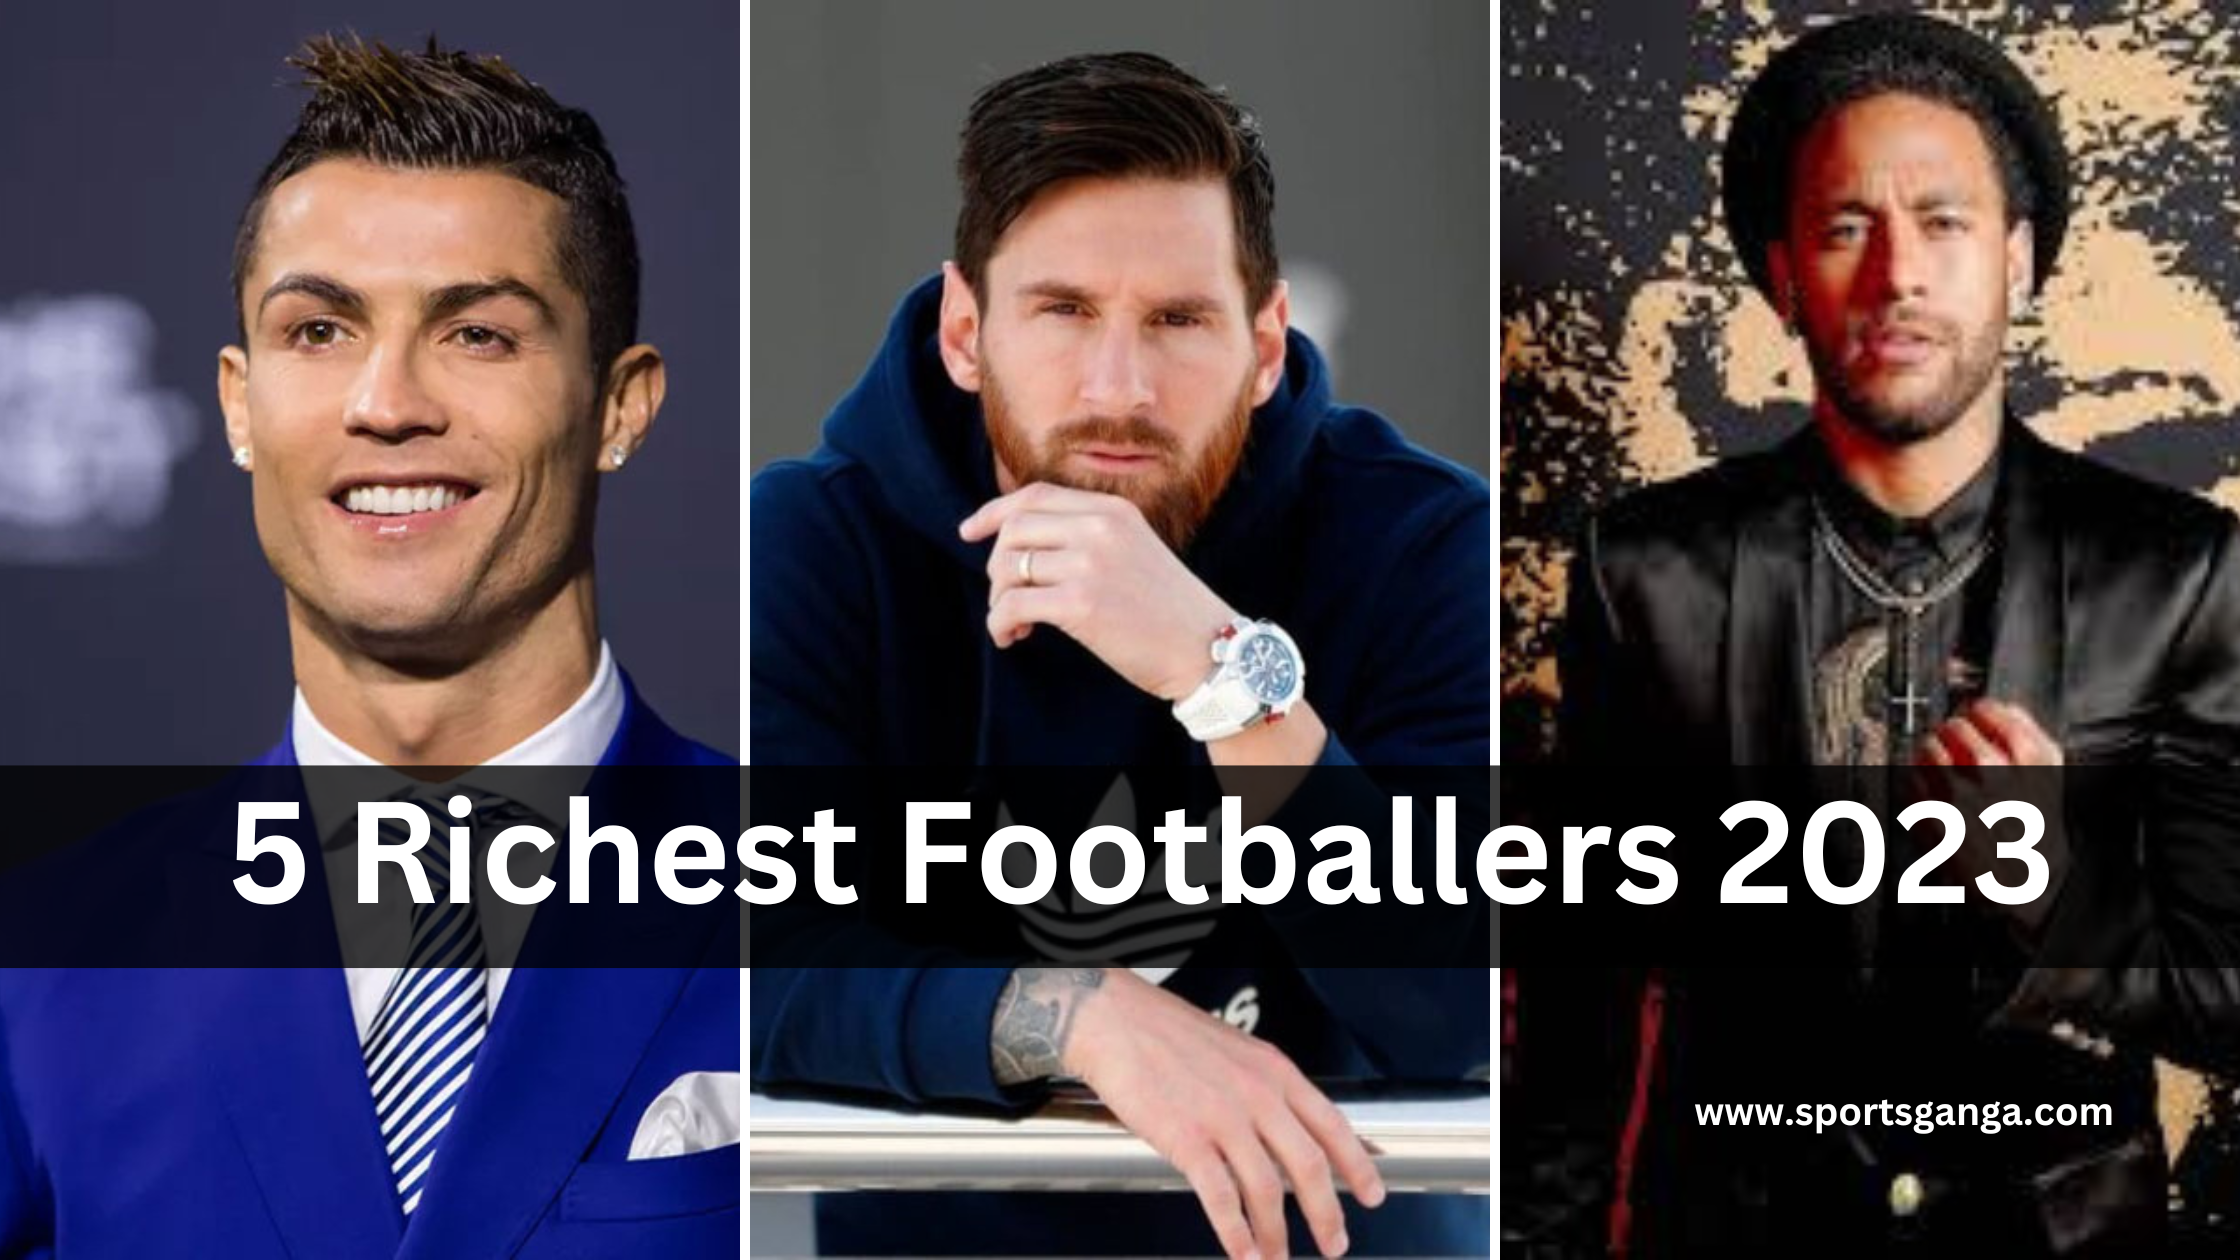 Top 5 Richest Footballers In The World And Their Net Worth In 2023 SPORTS GANGA